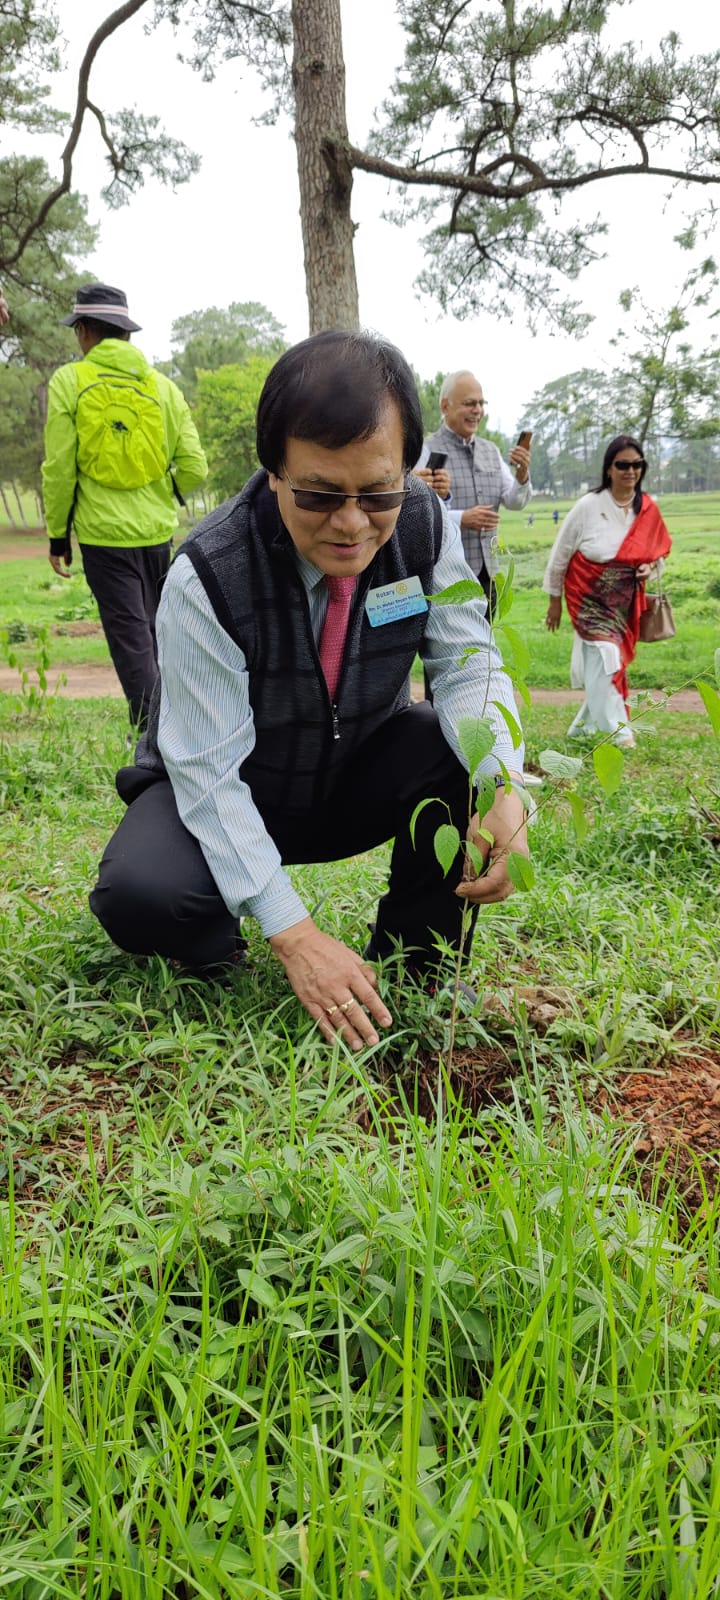 TREE PLANTTAION BY DG Dr MOHAN SHAYM KONWAR AT THE SHILLONG GOLF COURSE